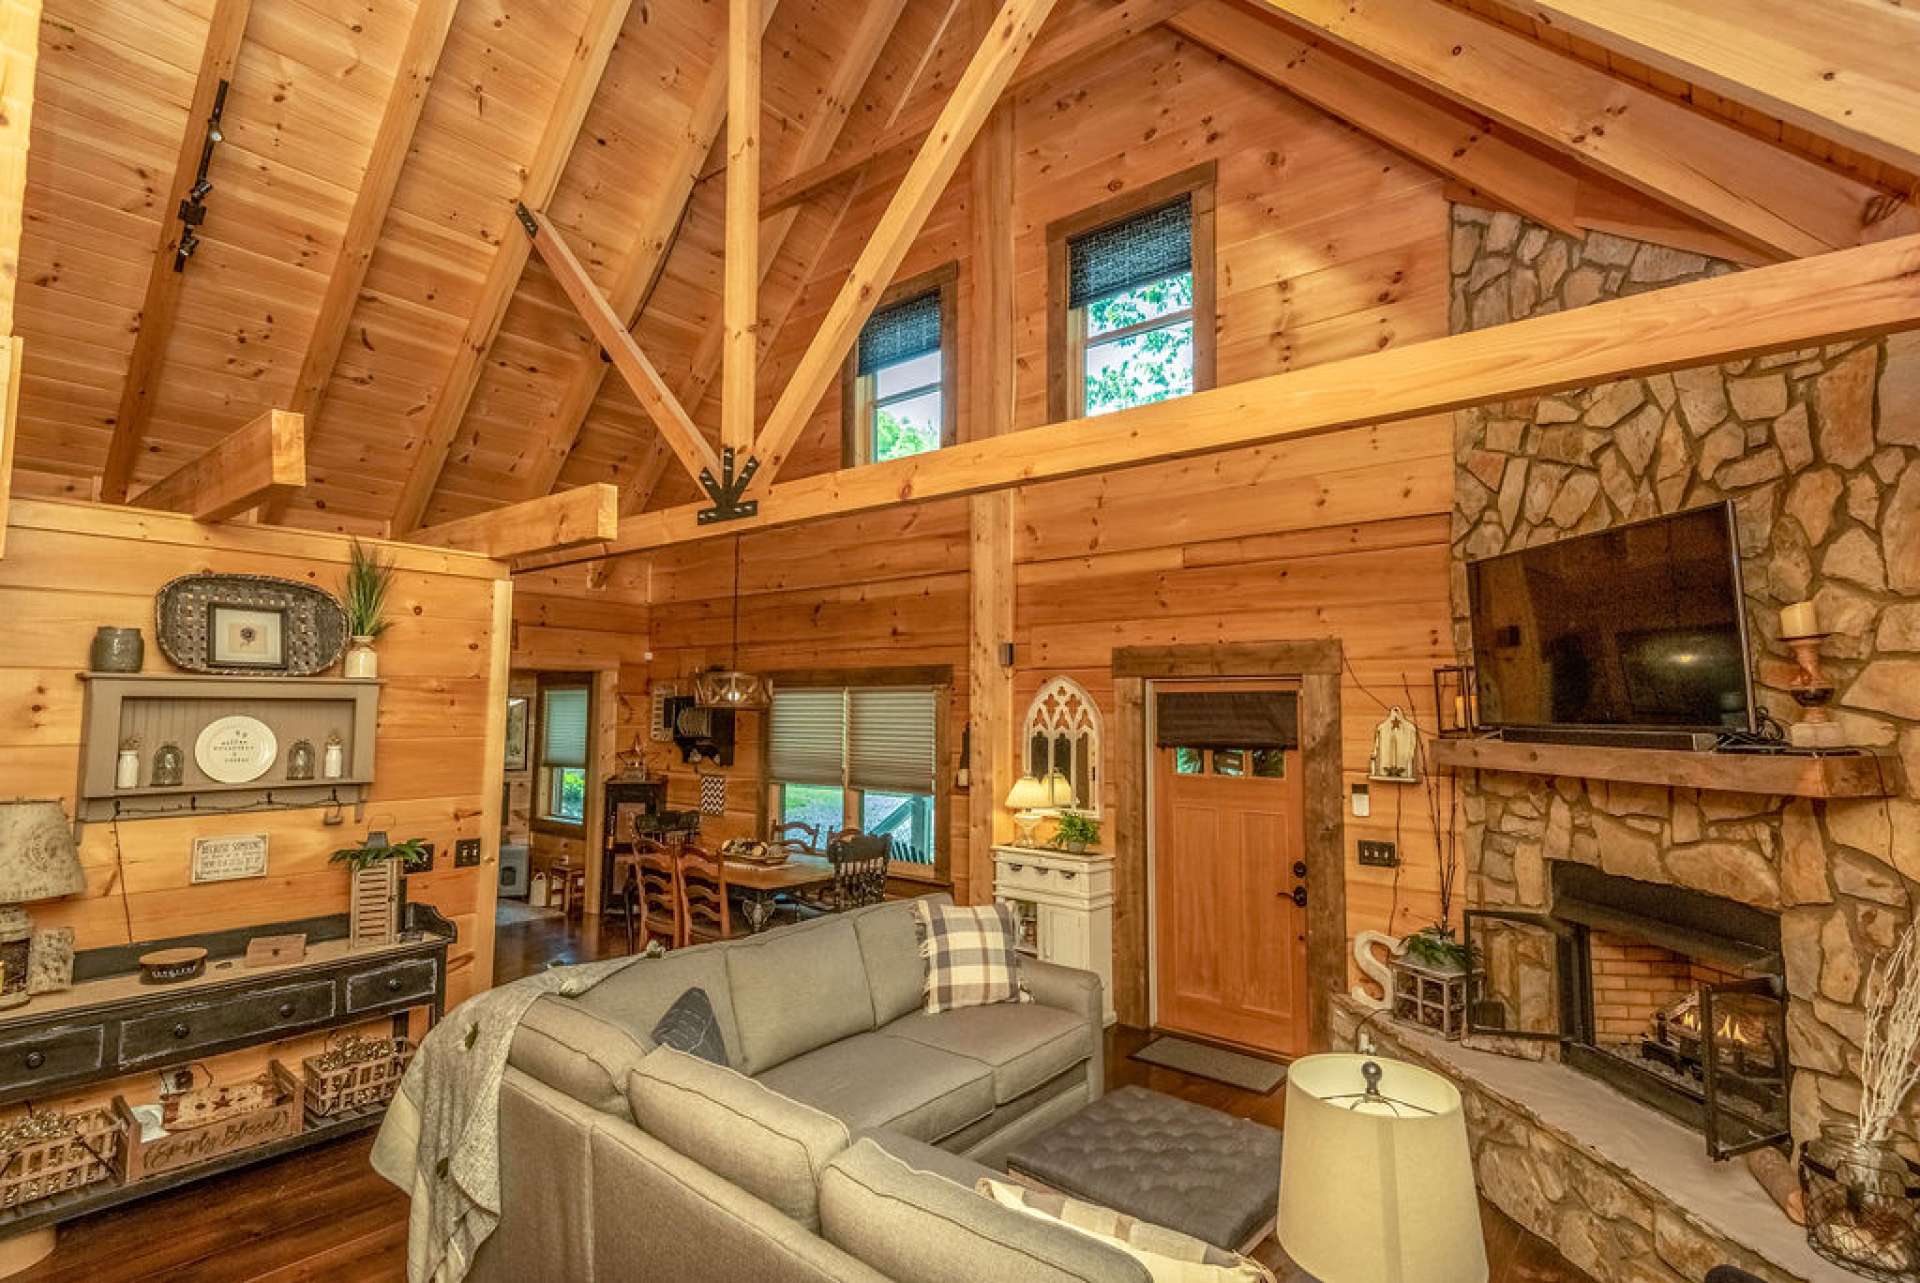 The great room offers a vaulted ceiling, wood floors, and stone fireplace with gas logs.